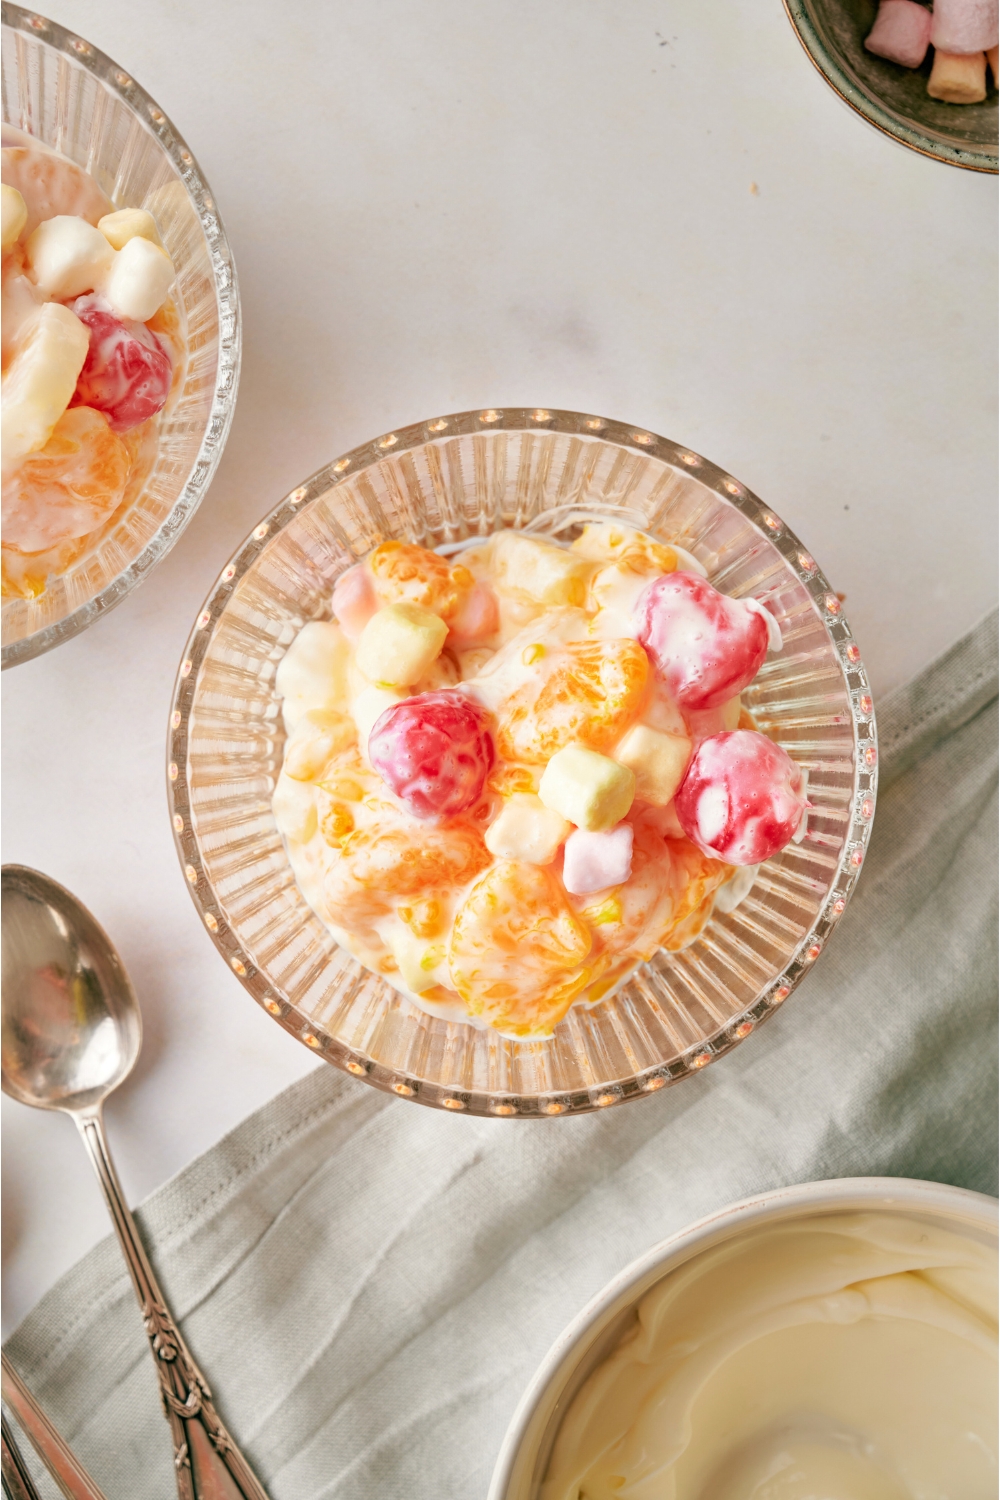 Fruit salad in a glass bowl on a grey counter.